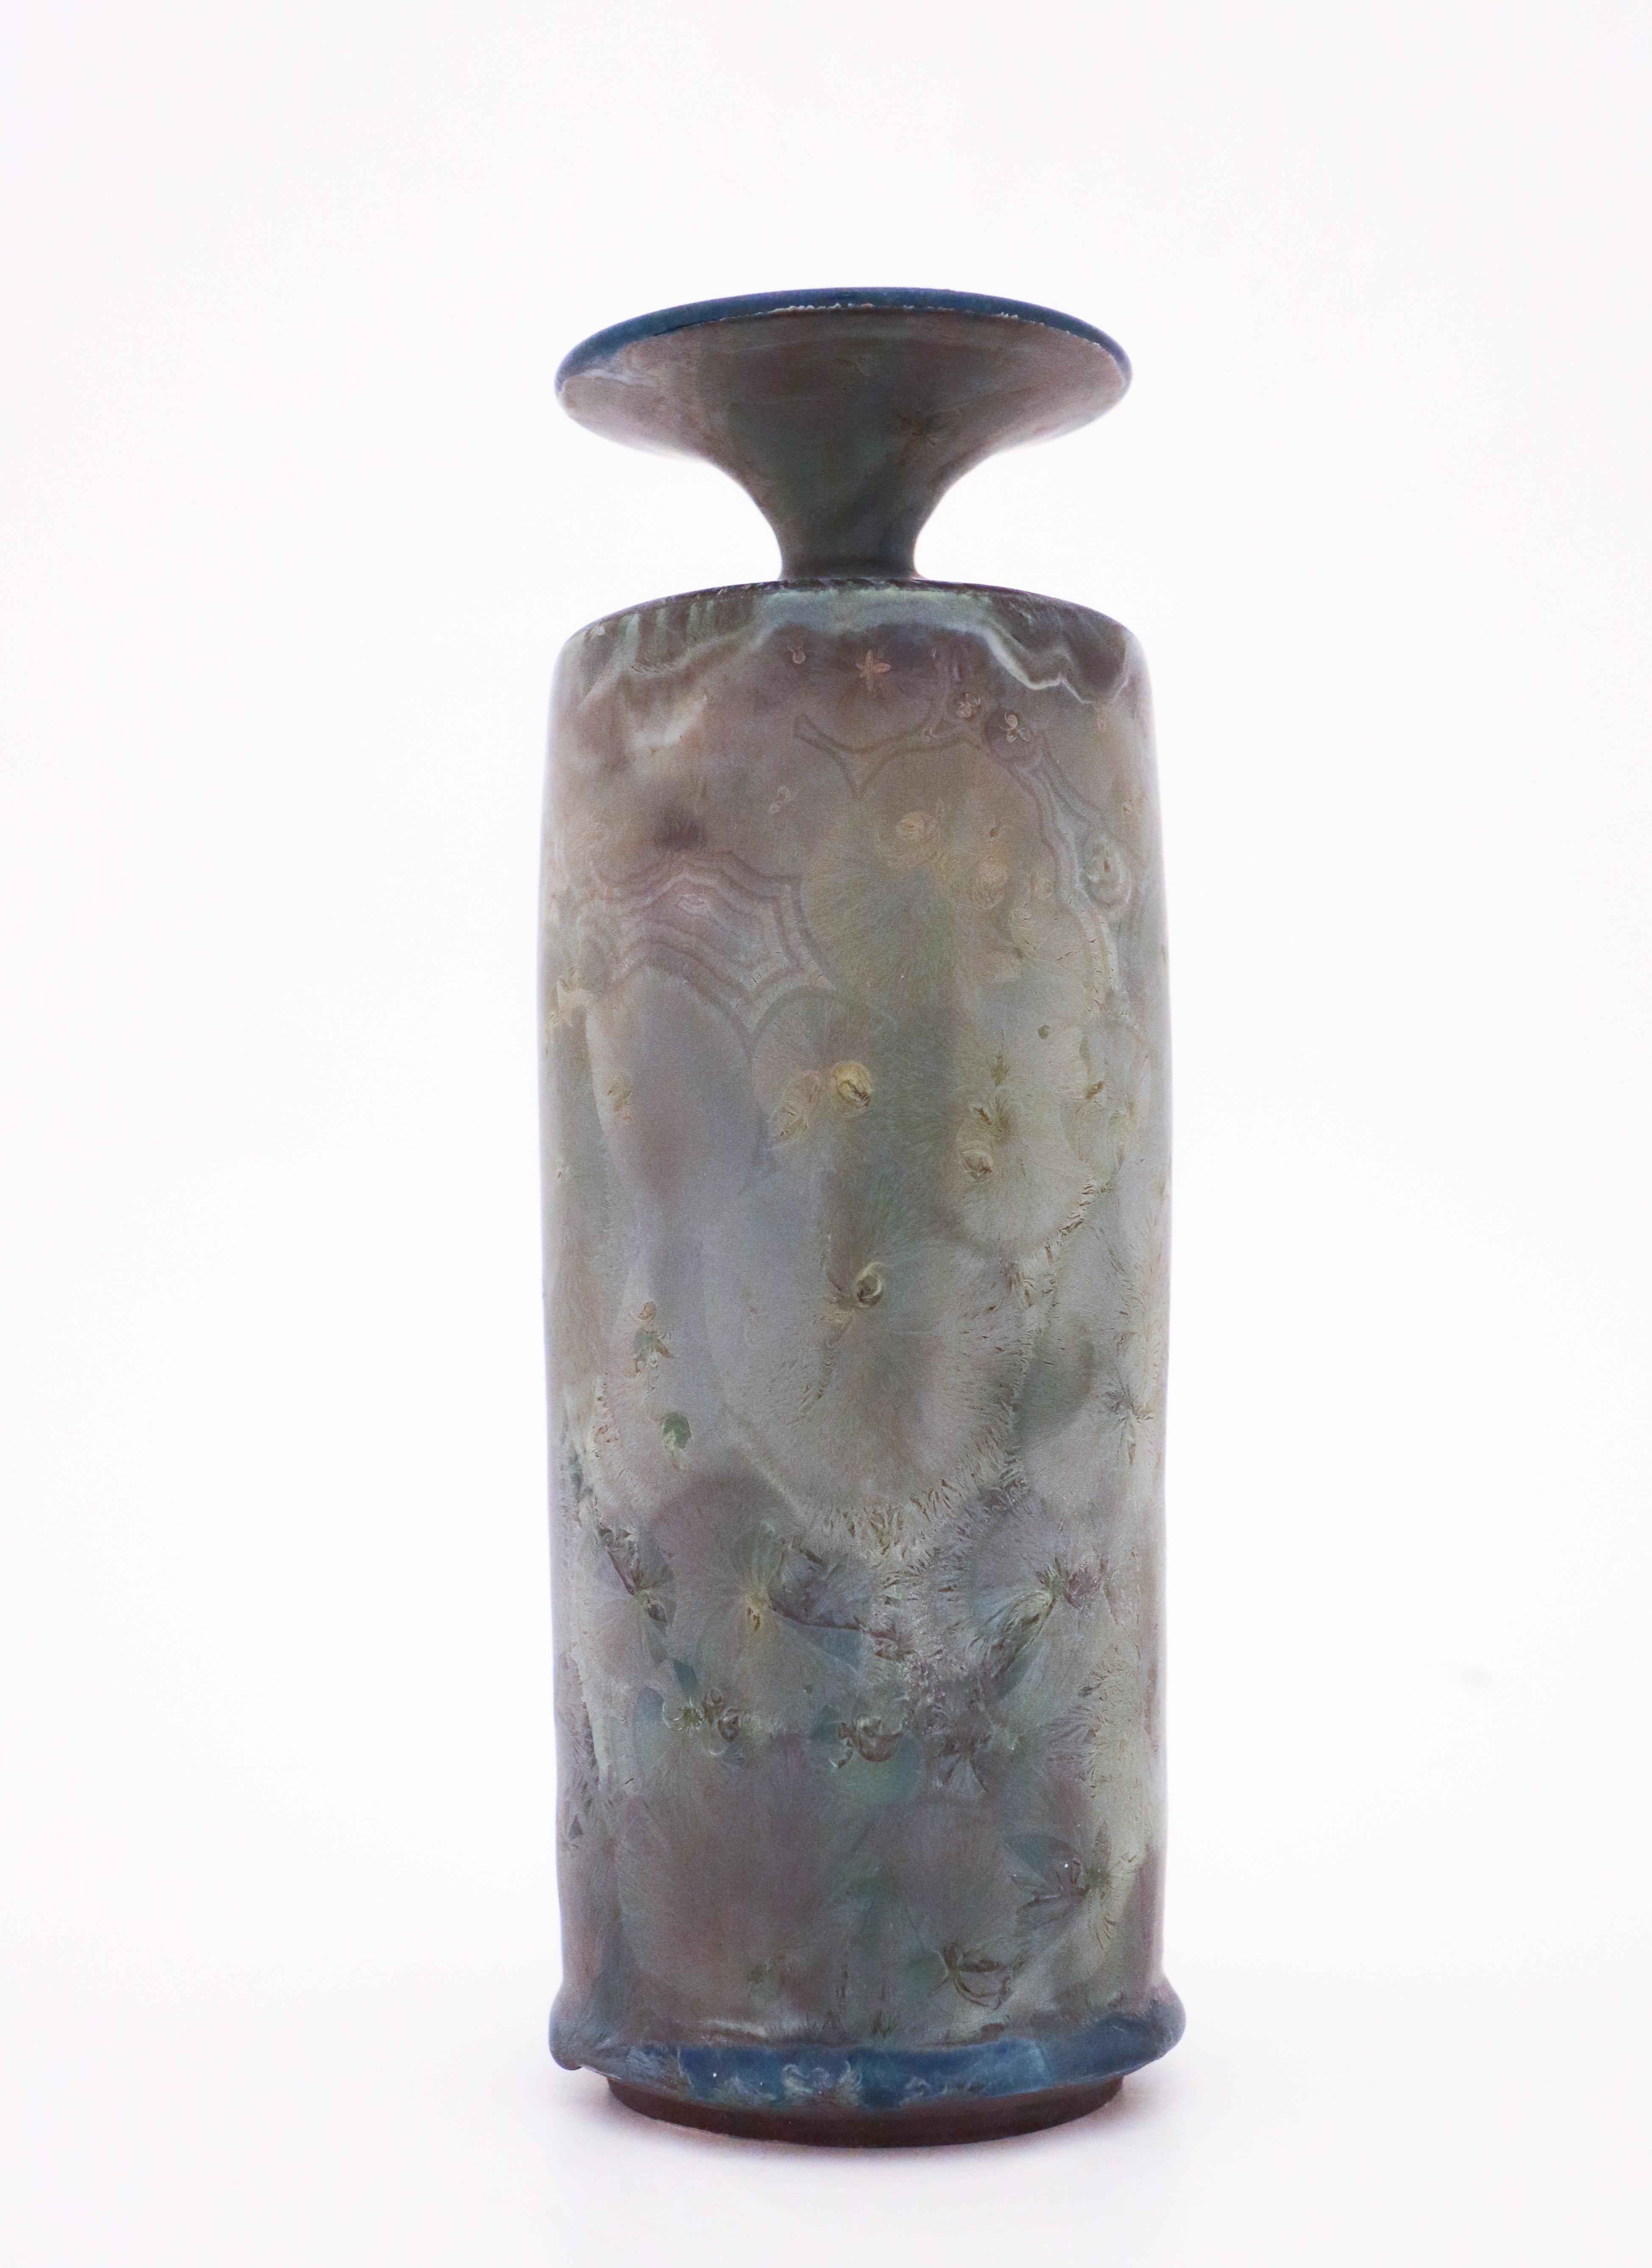 A unique vase with a lovely matte crystalline glaze designed by the contemporary Swedish artist Isak Isaksson in his own studio. The vase is 25 cm (10